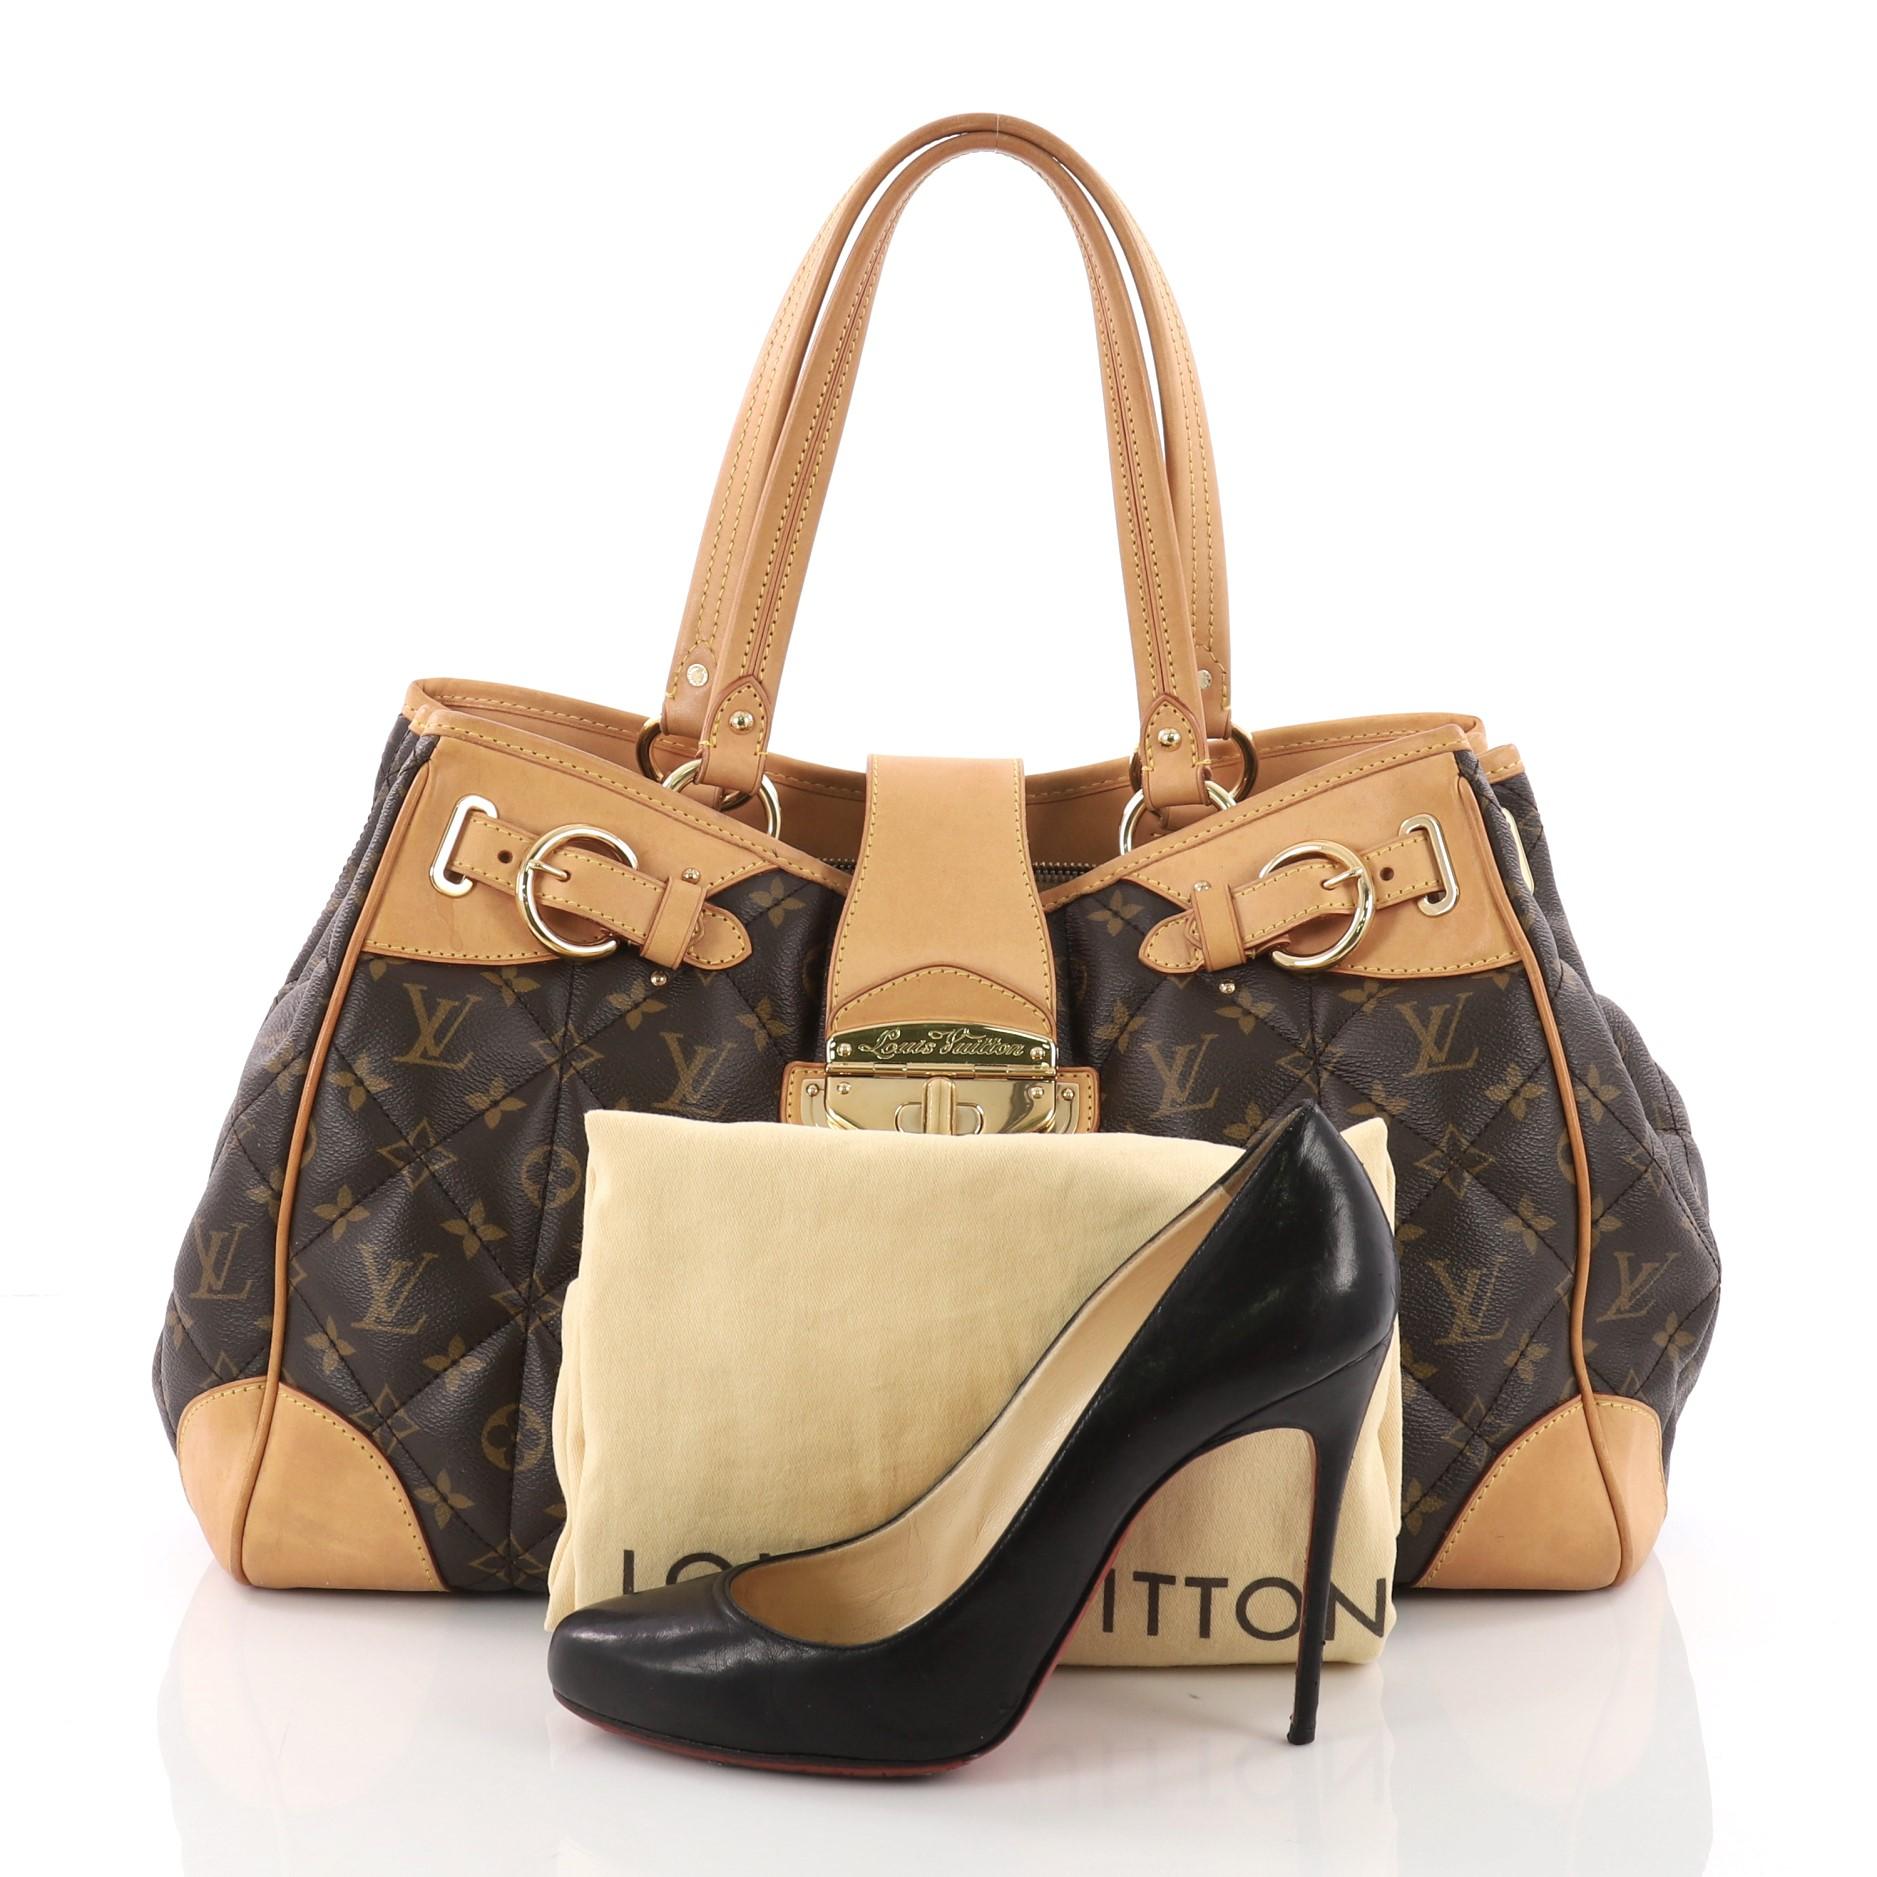 This Louis Vuitton Shopper Monogram Etoile, crafted from brown monogram coated canvas, features dual flat leather handles, triple quilting design, and gold-tone hardware accents. Its flap tab and turn-lock closure opens to a beige microfiber